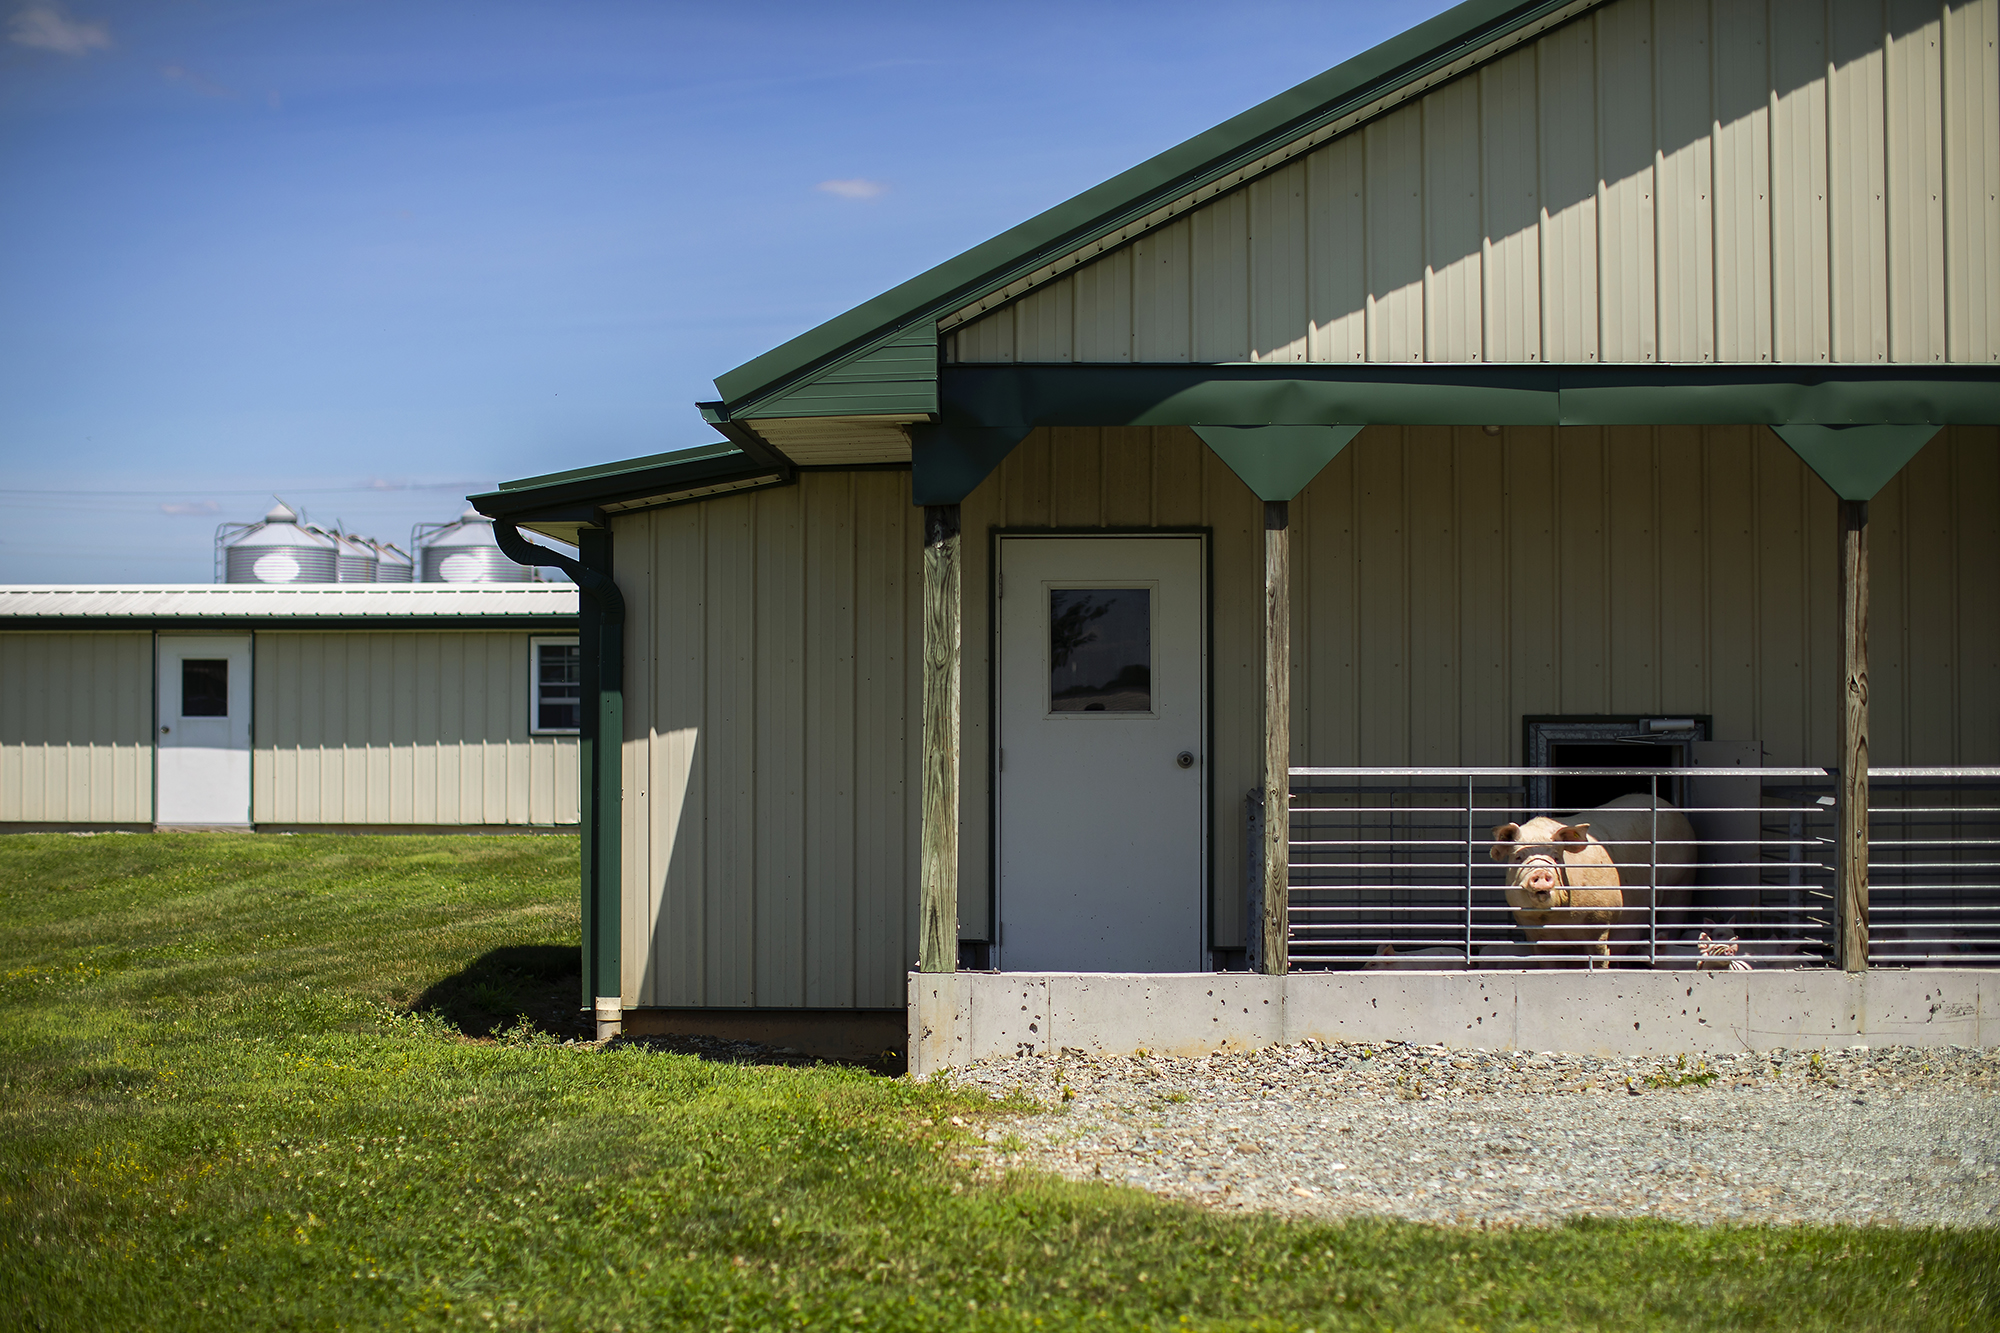 Sows at Penn Vet have access to outdoor open space, an amenity that translates to improved welfare for the animals. Penn Vet is helping farmers across the state embrace new practices to help make food products more appealing to today's buyers